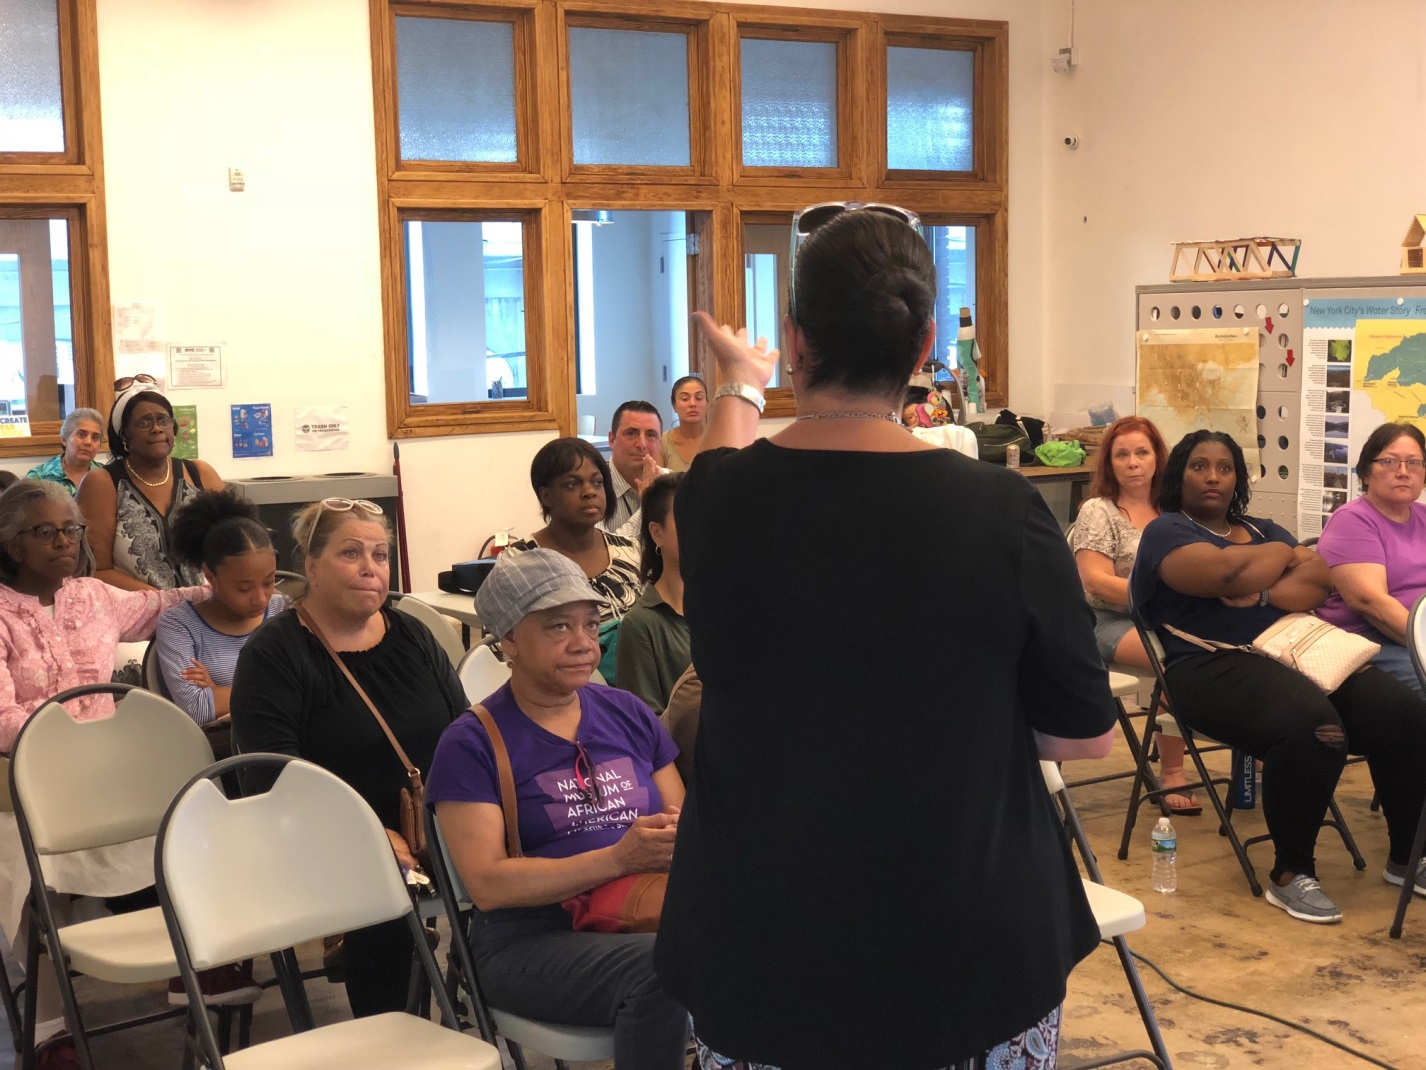 Assemblywomen Stacey Pheffer Amato held her second free Naloxone Training session in an attempt to reverse and stop opioid overdose.